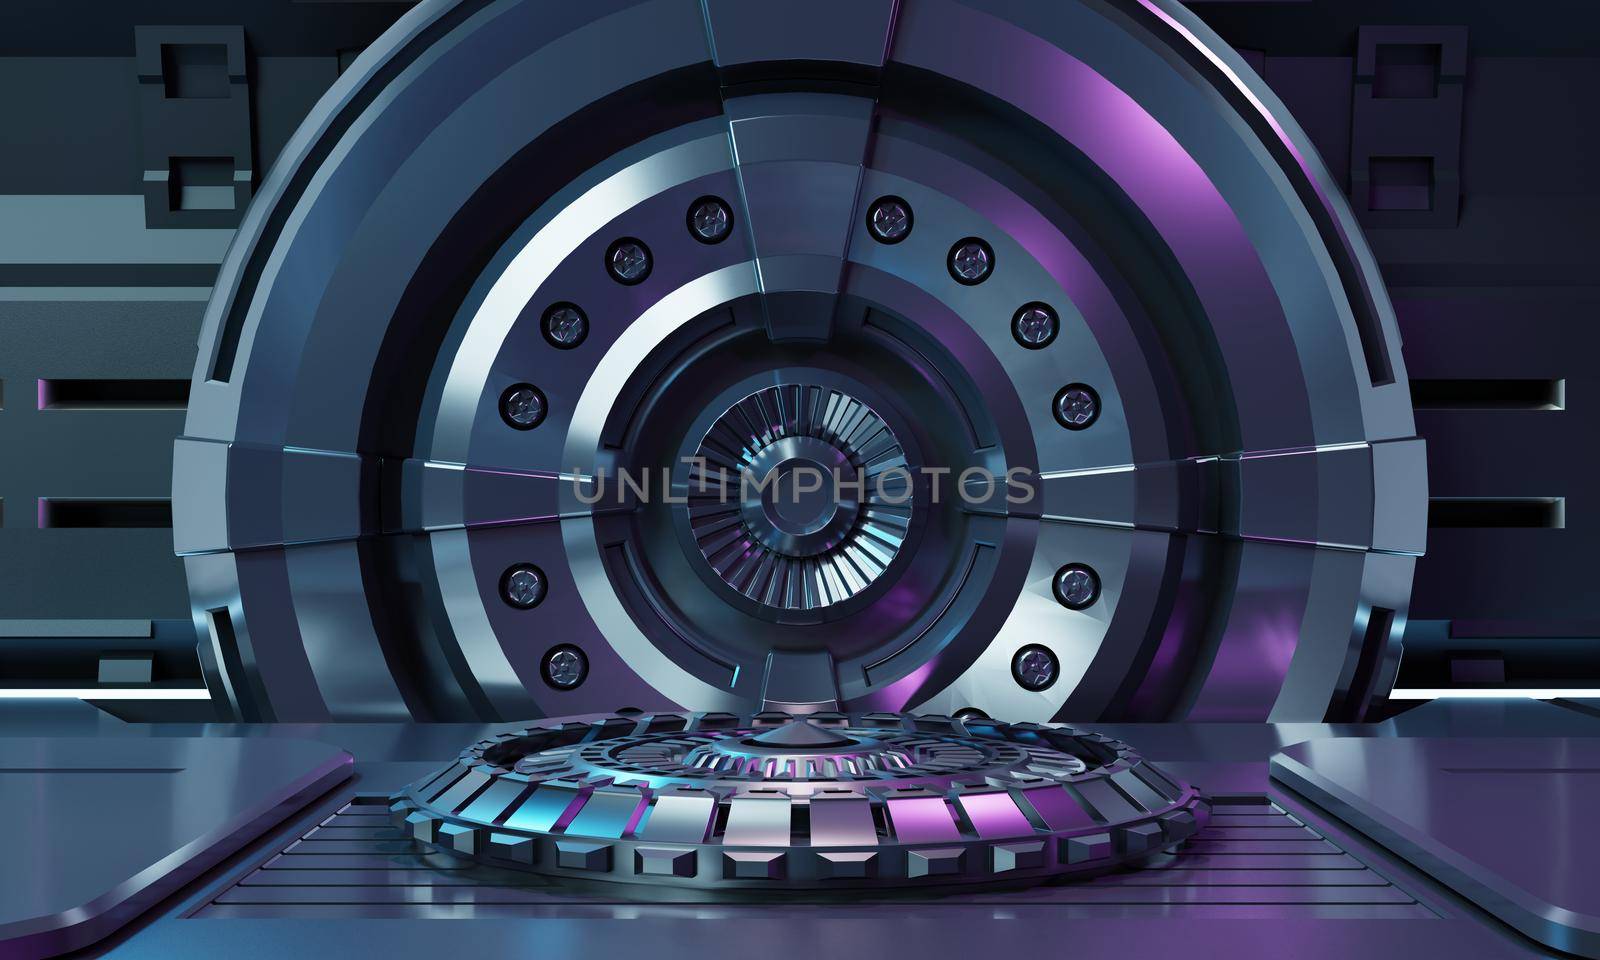 Sci-fi product podium showcase inside spaceship with security metal gate background. Technology and object concept. 3D illustration rendering